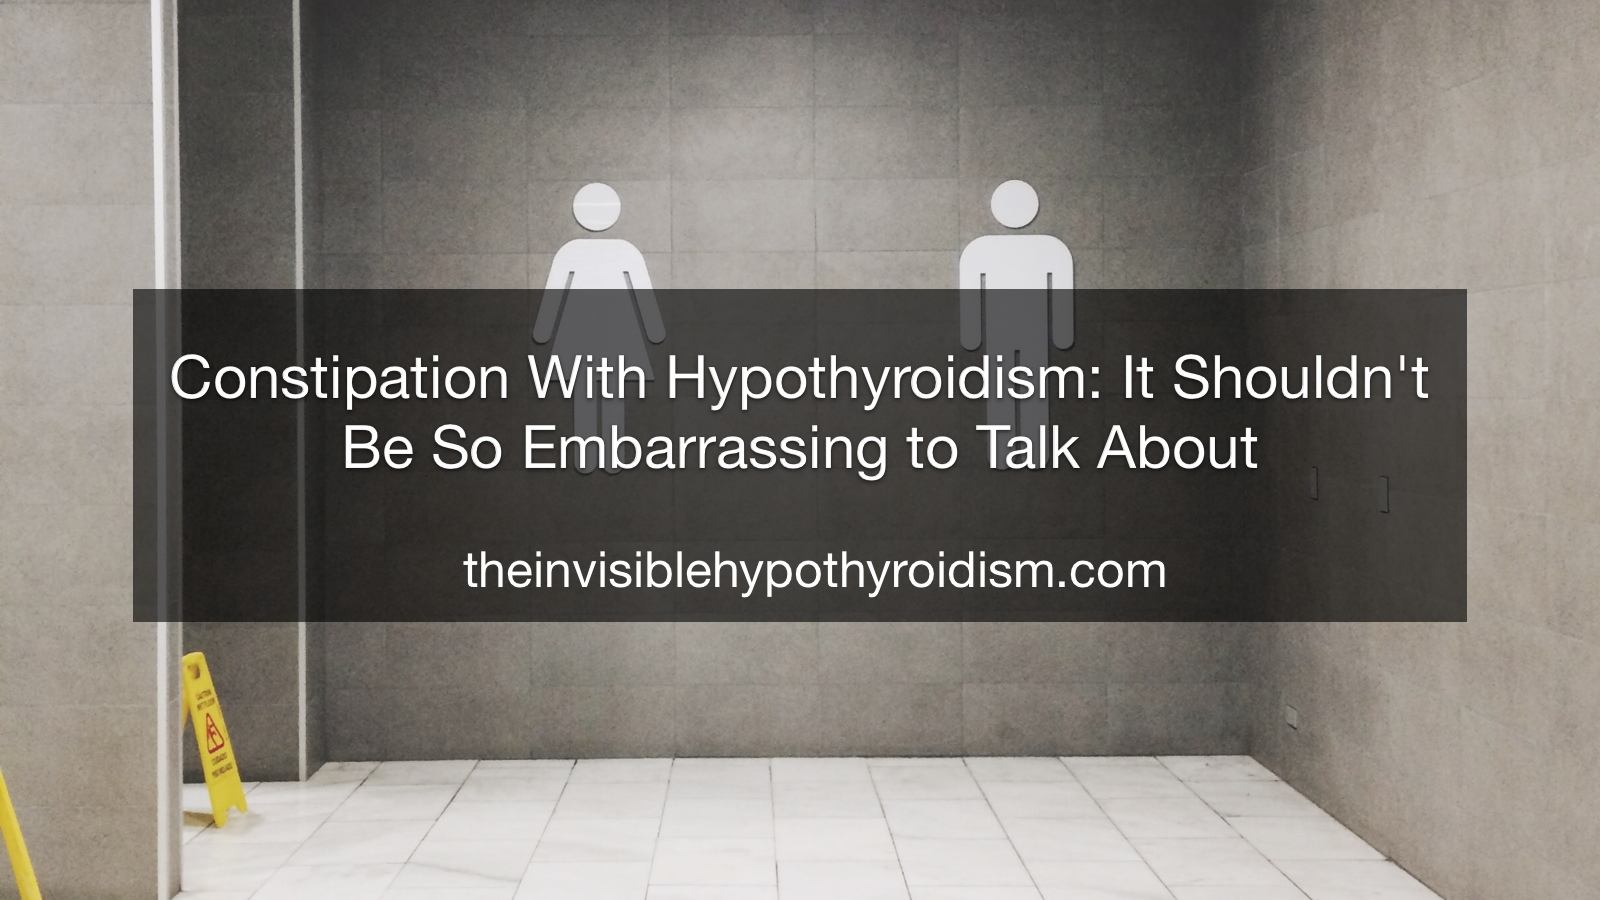 Constipation With Hypothyroidism: It Shouldn't Be So Embarrassing to Talk About